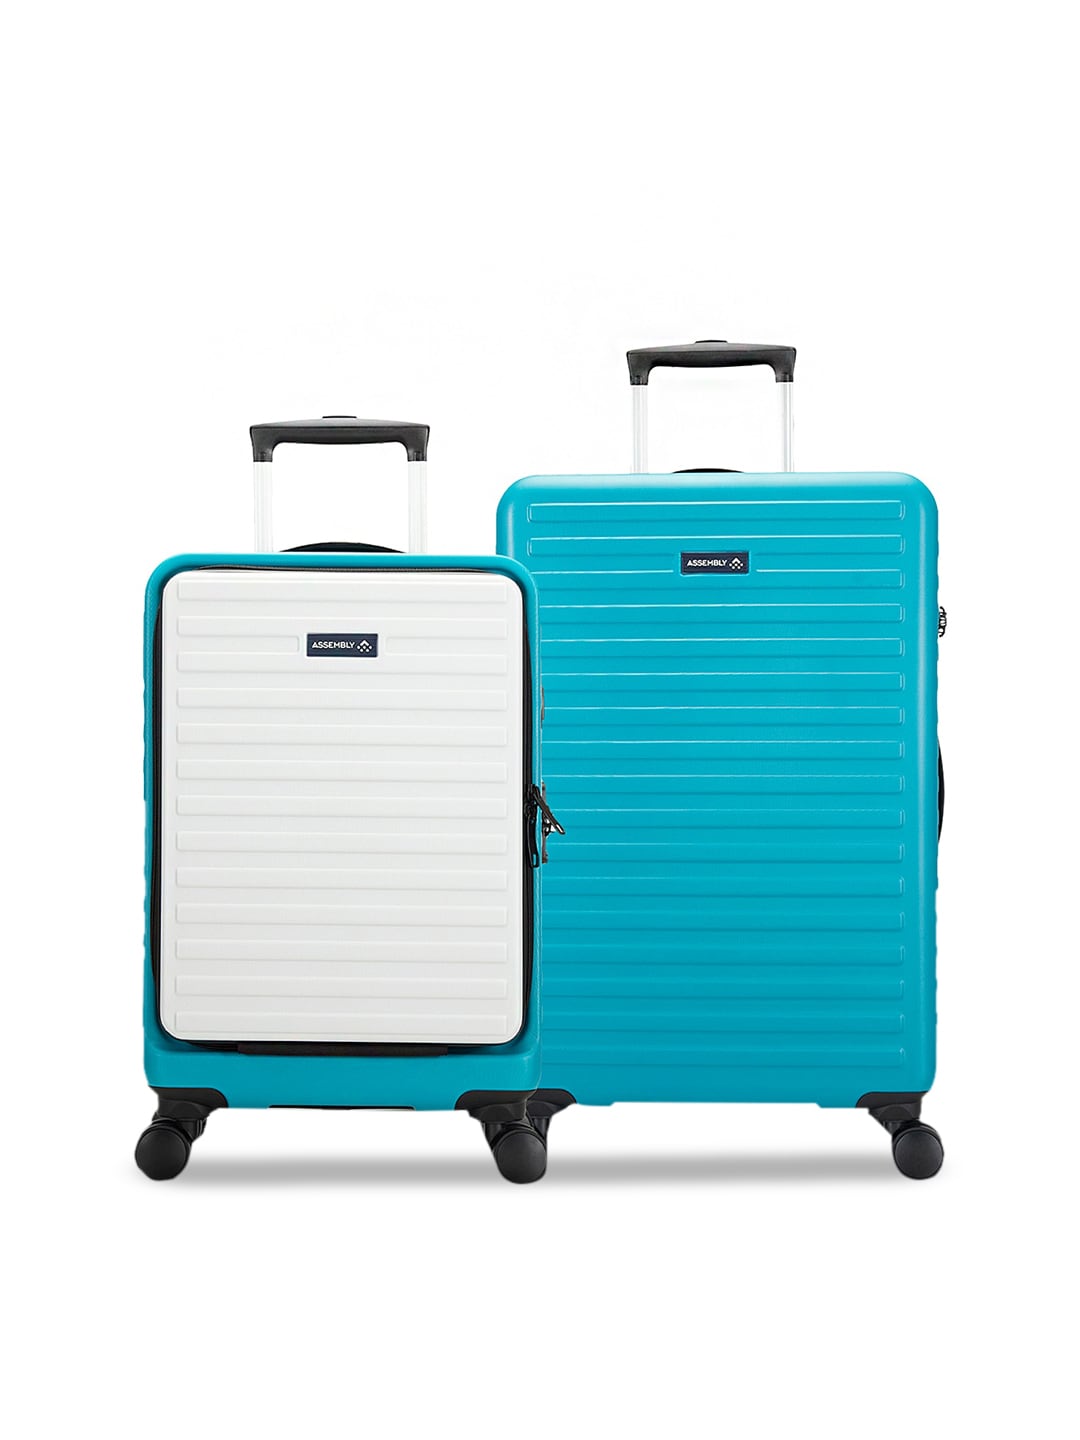 Assembly Set of 2 Teal Blue & Silver-Toned Check in HardsidedTrolley & CabinLuggageBag 67L Price in India